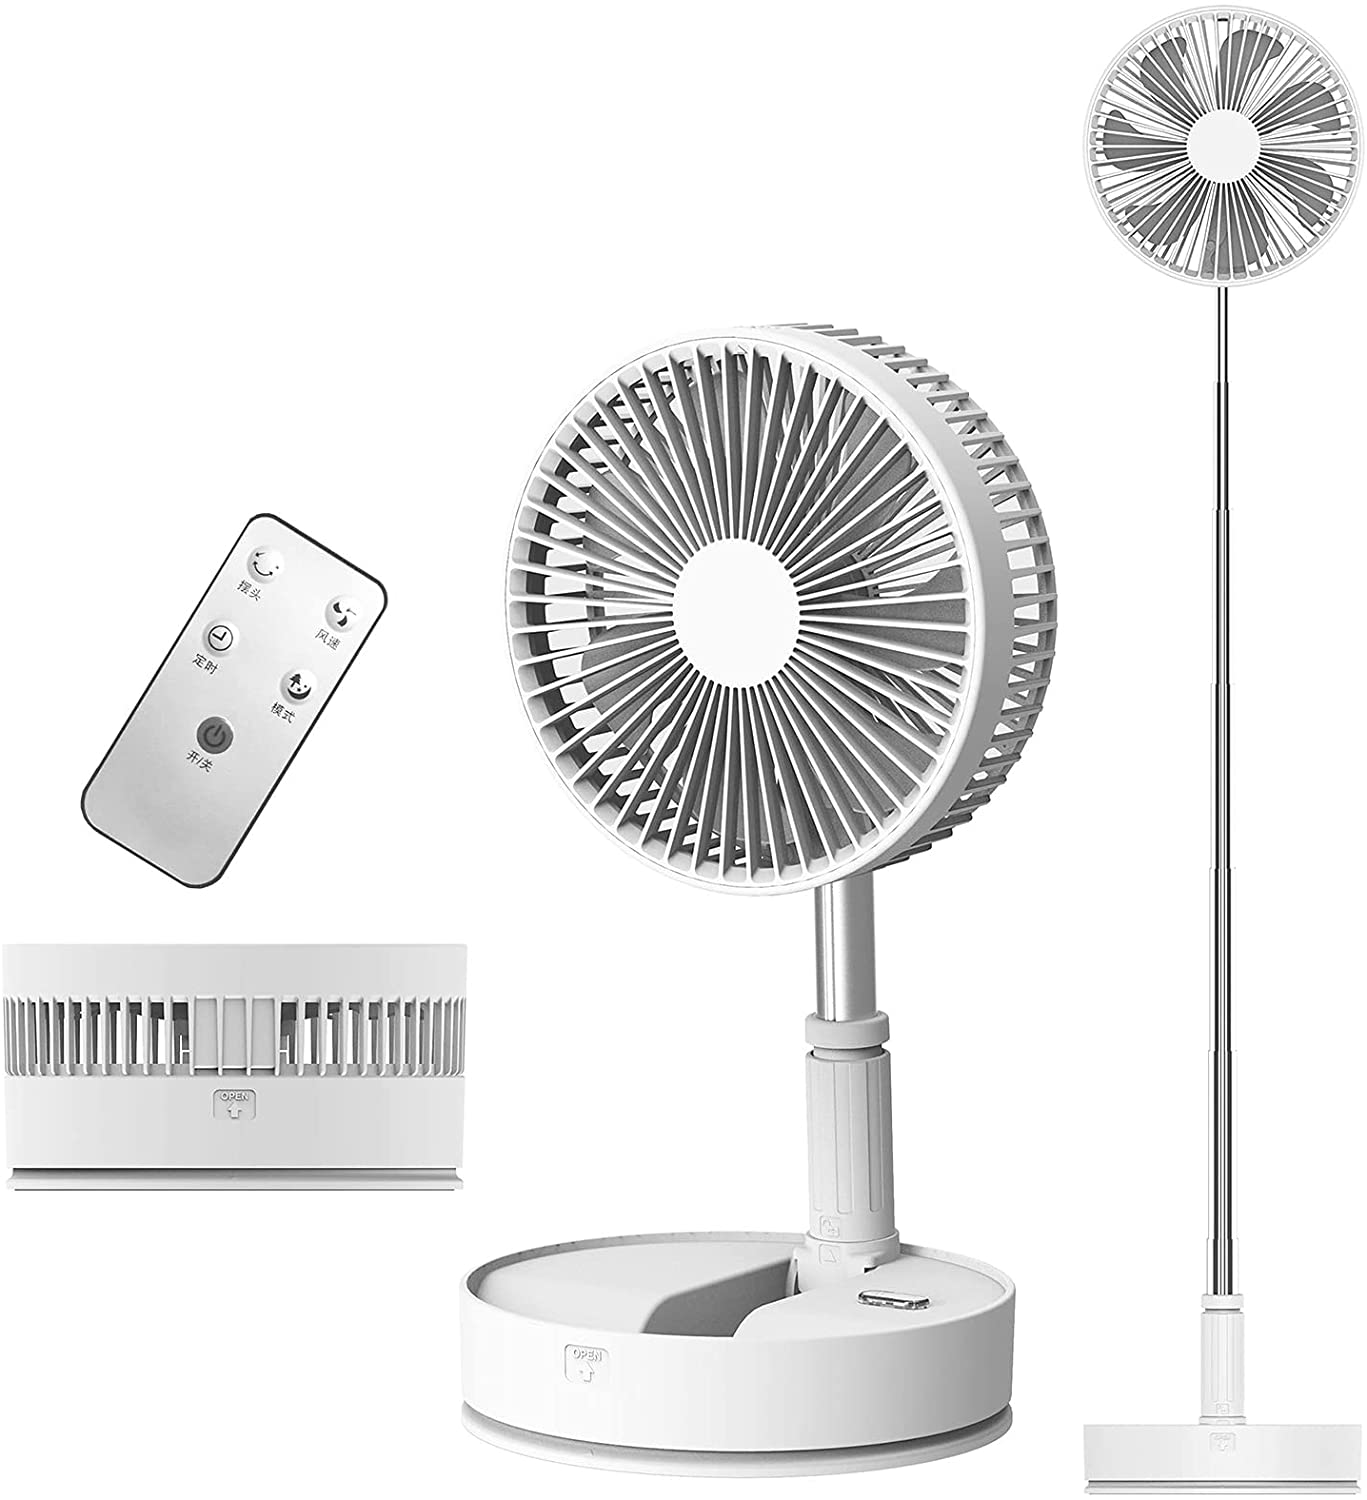 ''Portable Folding Desk Fan with 60 Degree Rotatable Head and Remote, USB 7200mAh BATTERY''